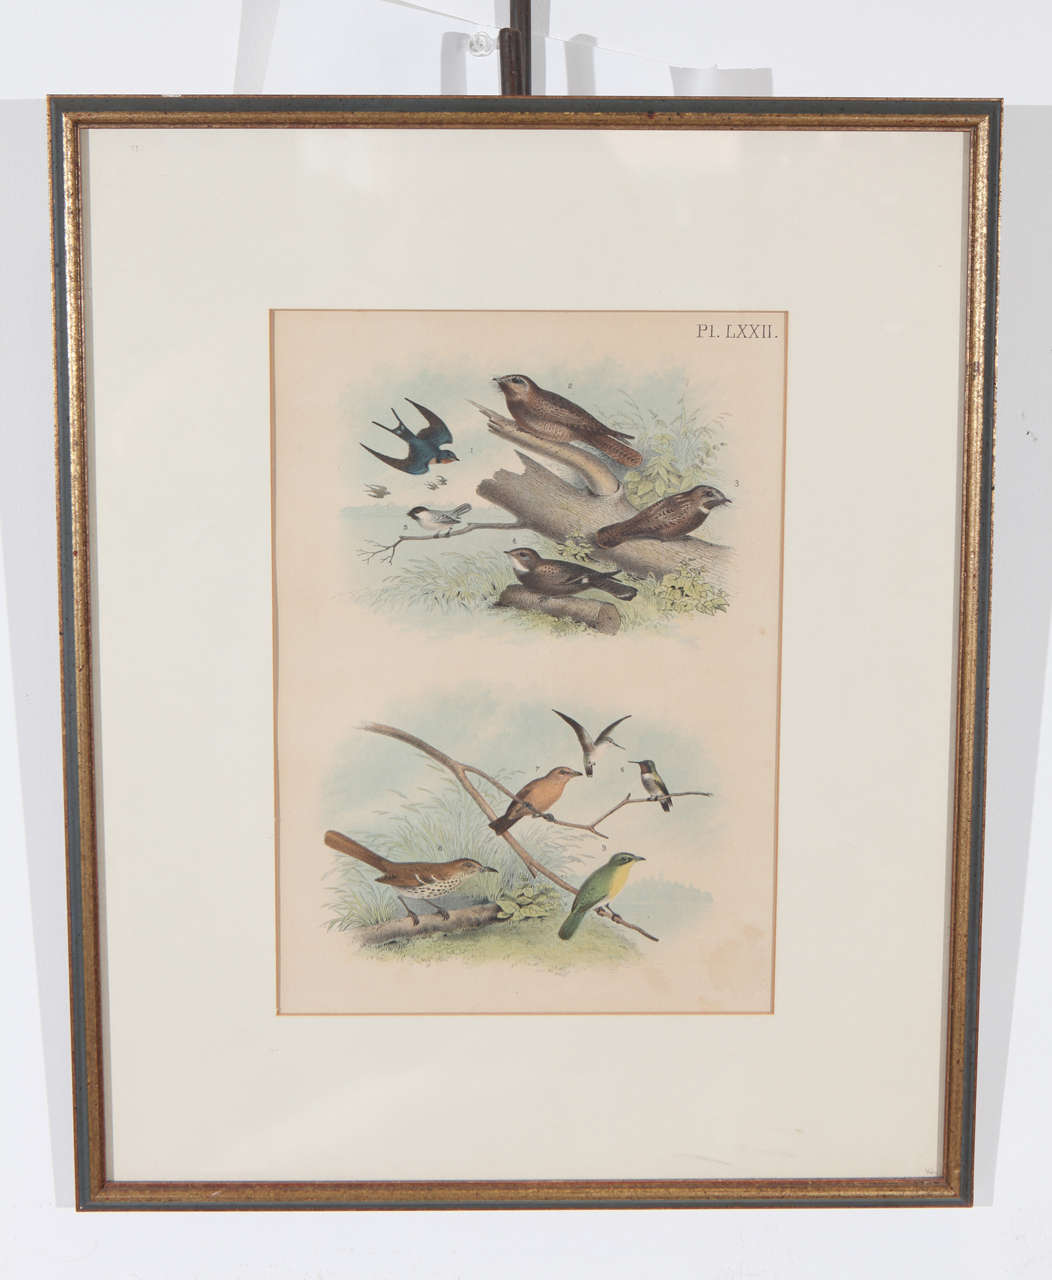 These lovely bird prints are handsomely framed in antique frames in complimentary tones of teal and rust paint with gold gilt. The delightful bird vignettes have an idyllic quality with a variety of species of birds perched and in flight.